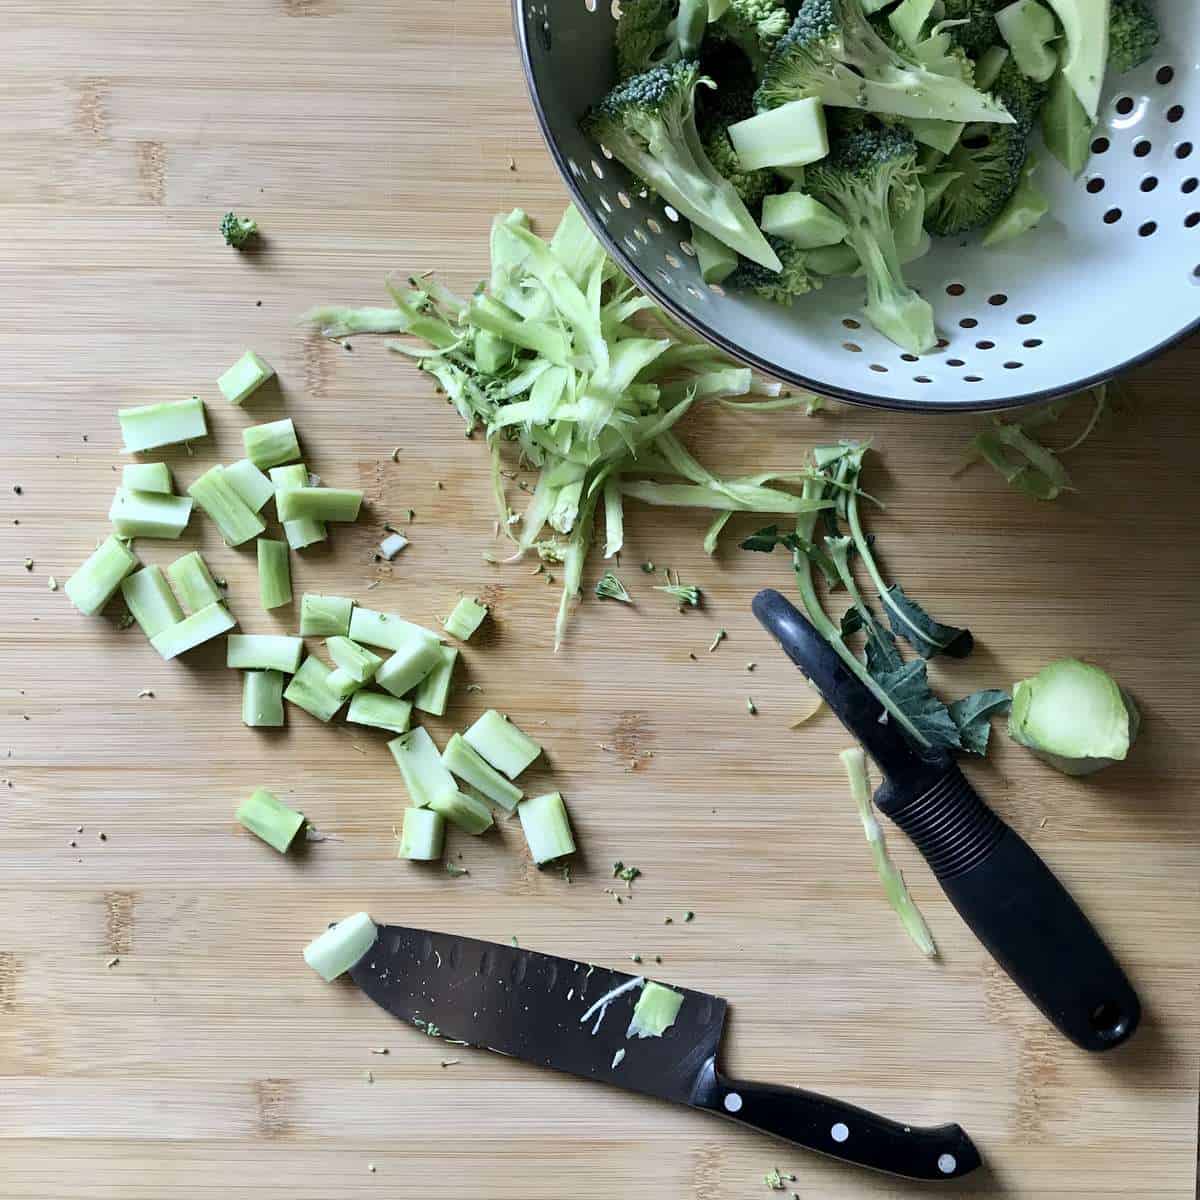 Chopped broccoli stalks on a wooden board, next to a knife.